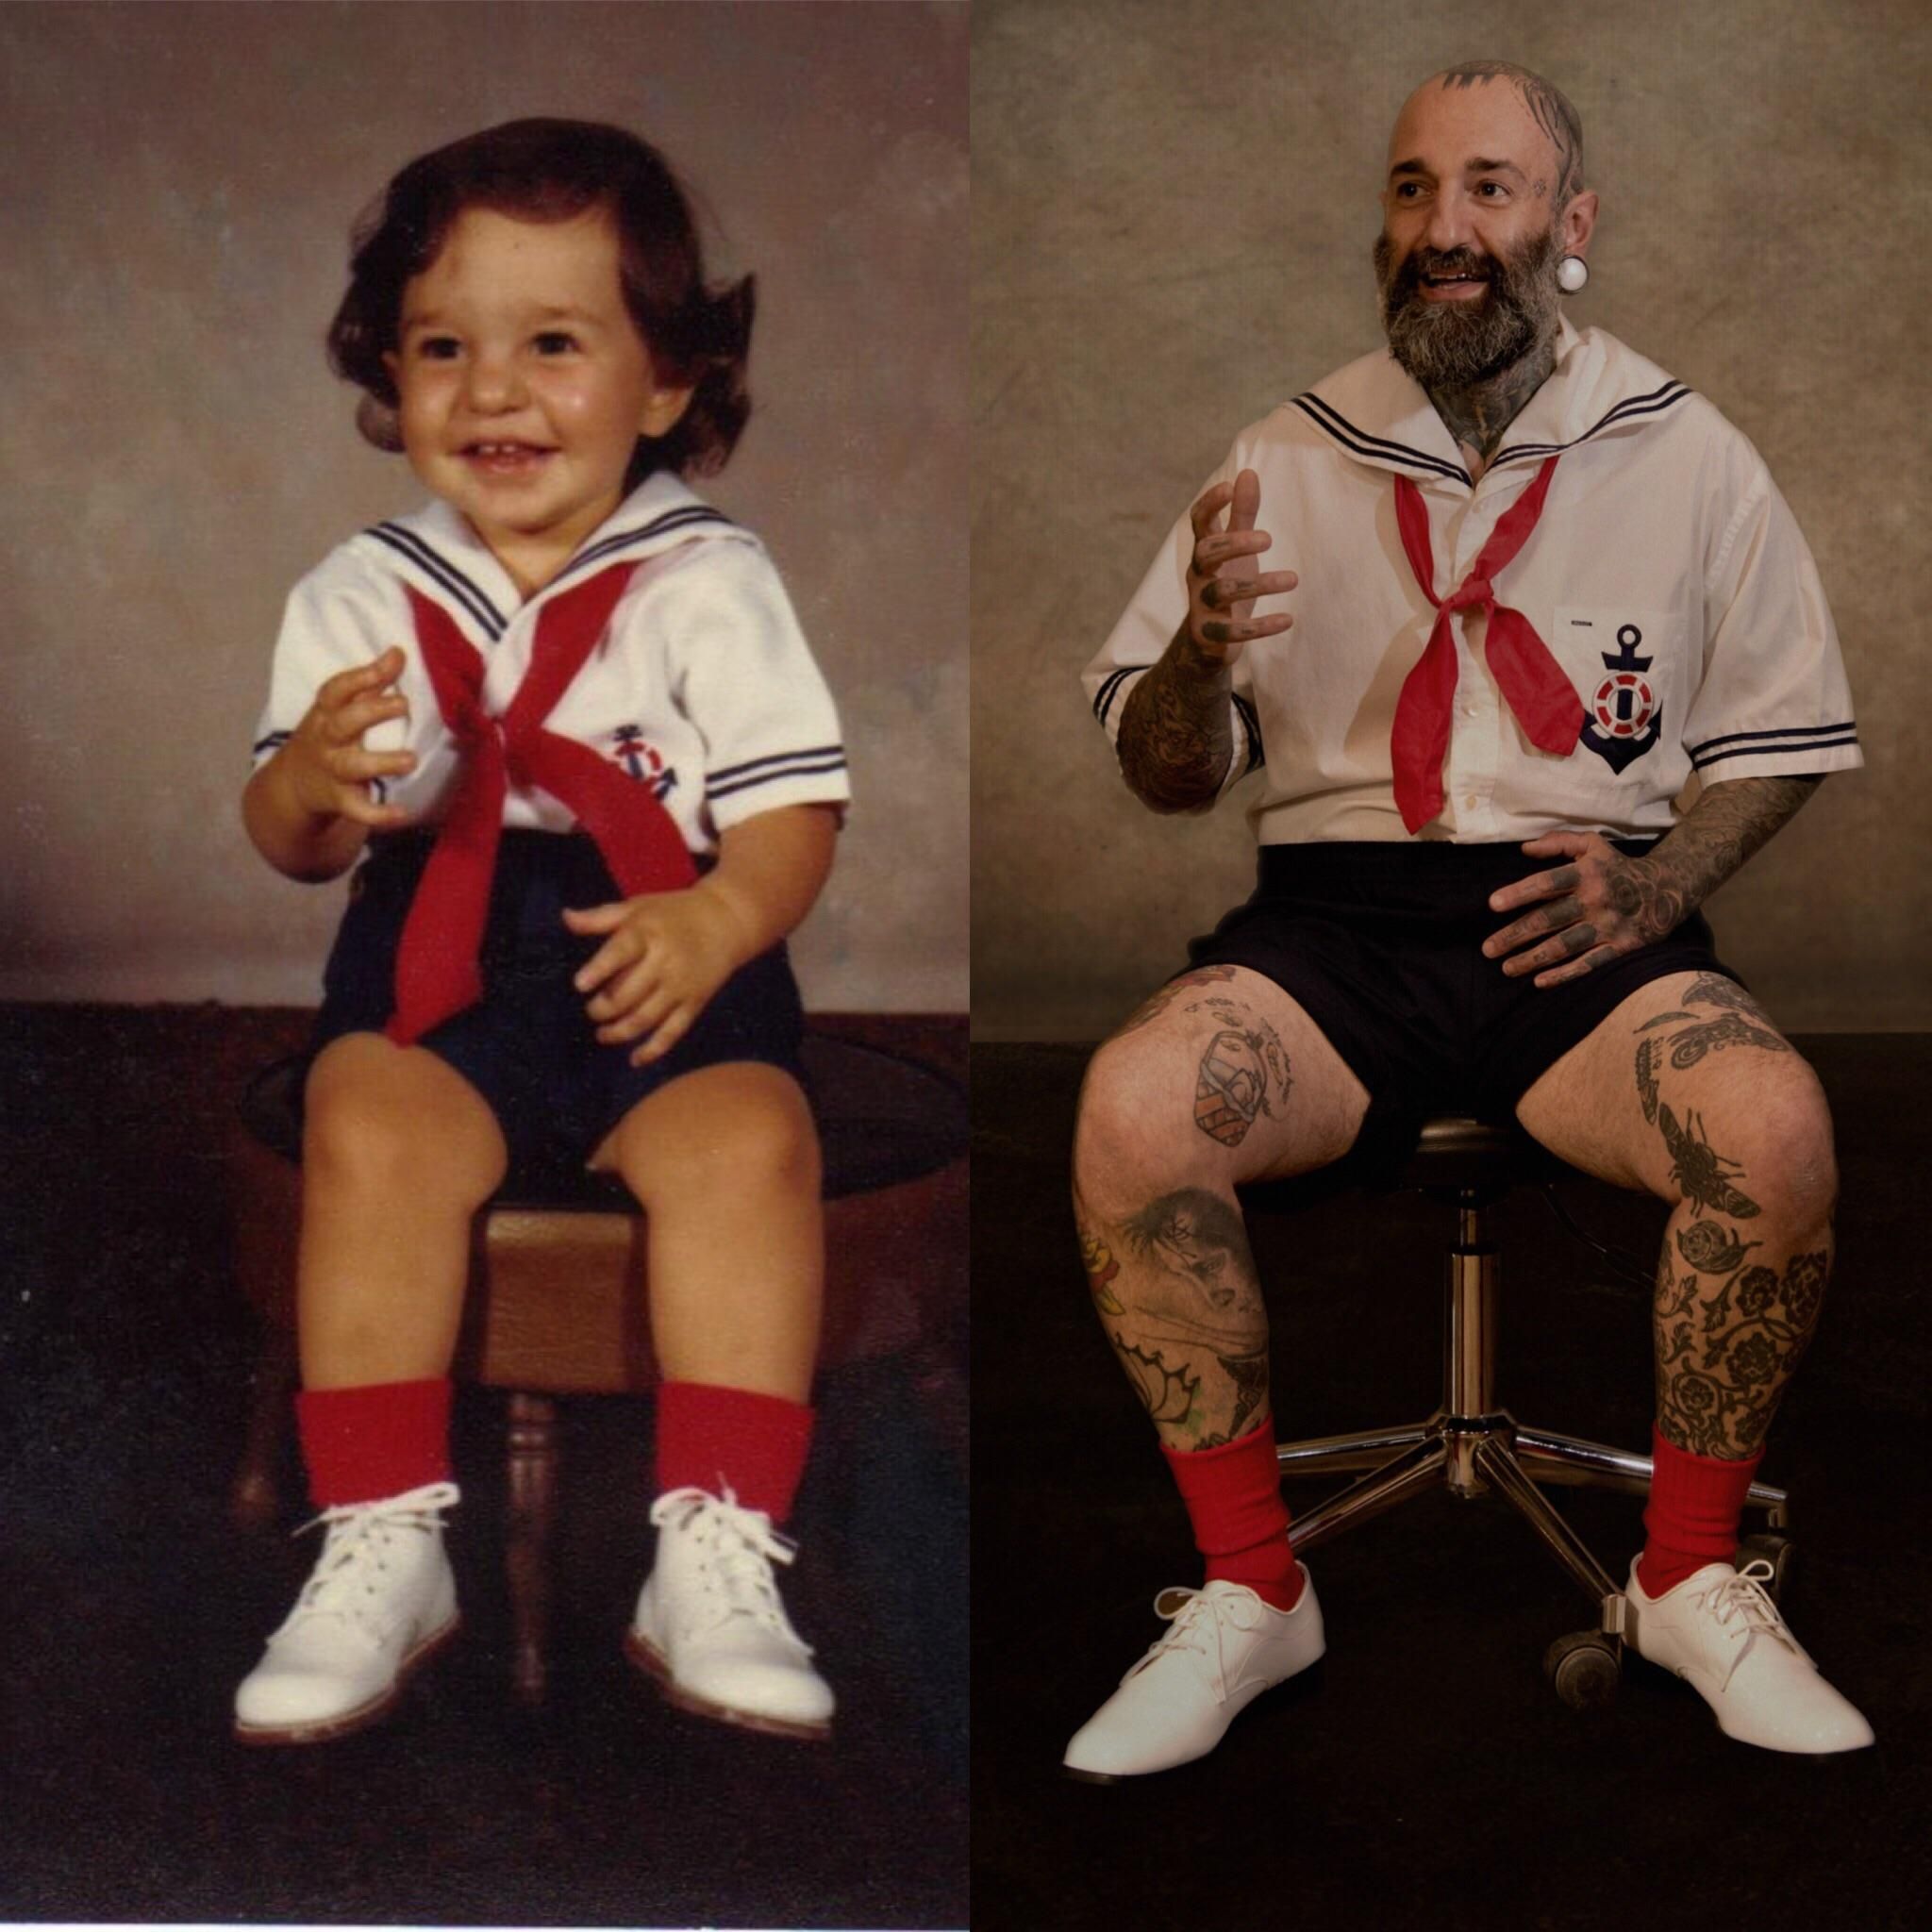 My mother made me the 2 year old outfit and the 39 year old outfit.